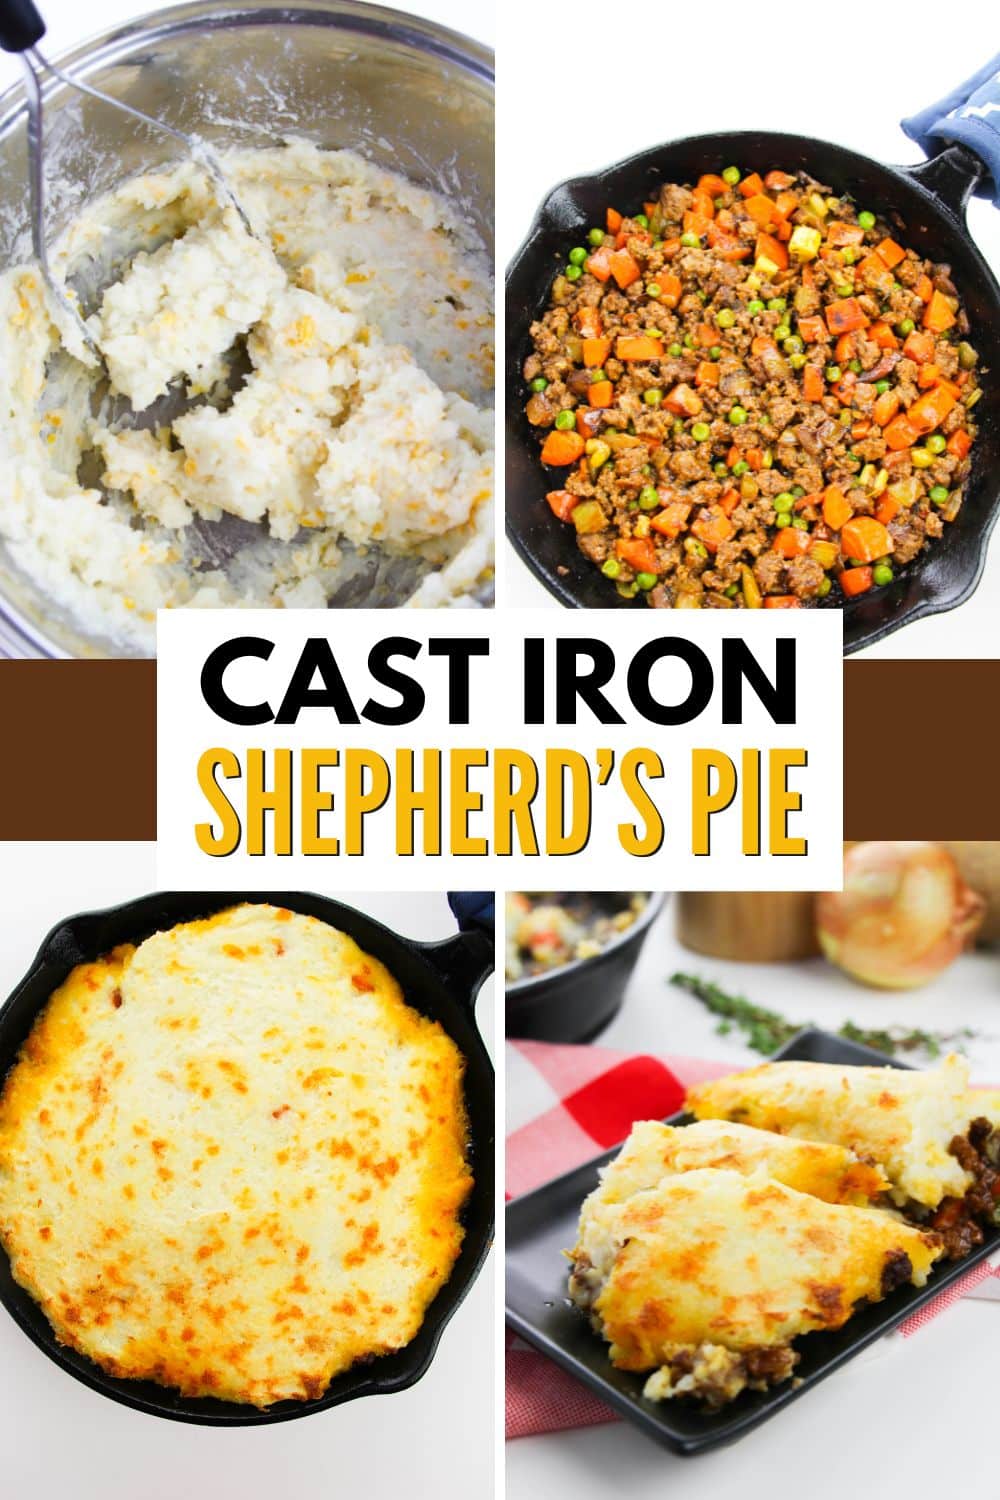 Cast Iron Shepherd's Pie is a classic and hearty dish that is traditionally prepared in a cast iron skillet.